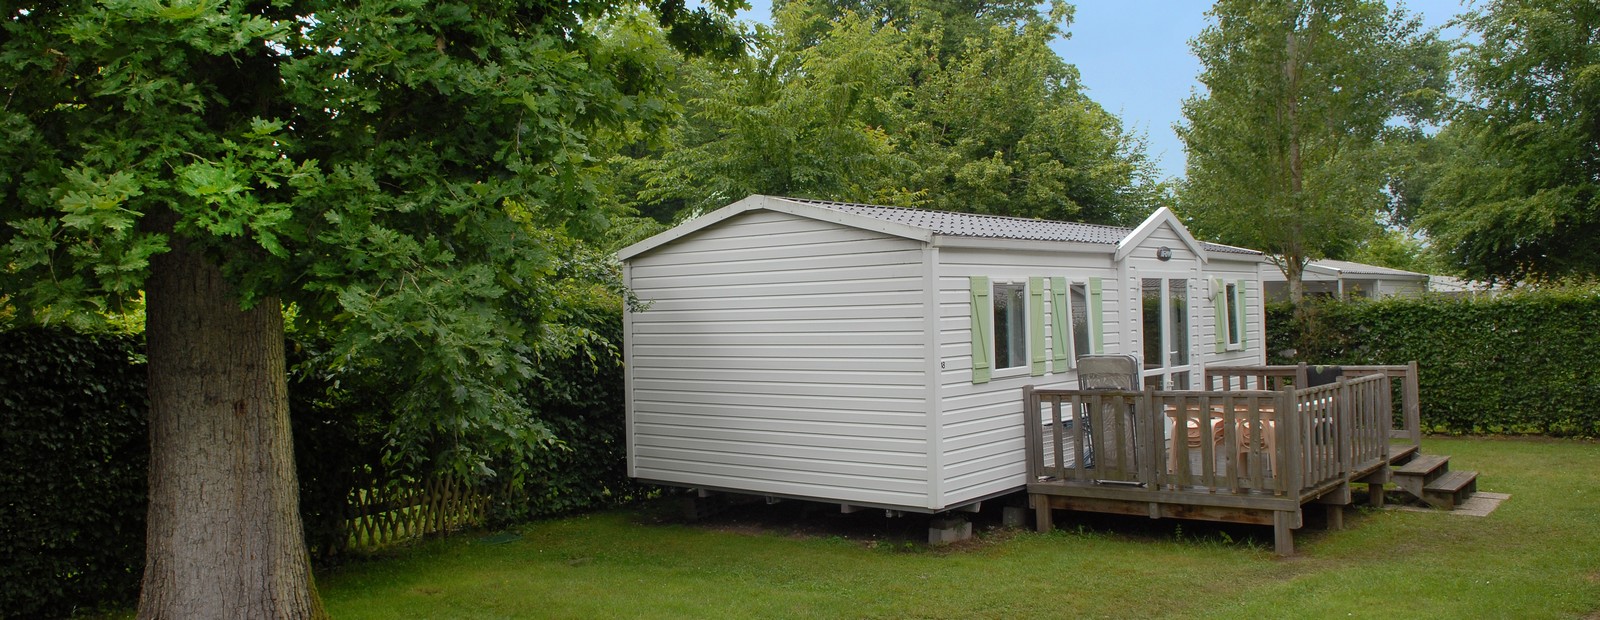 Cottage for 6 people in Camping de la Forêt in Jumièges near Rouen in Normandy